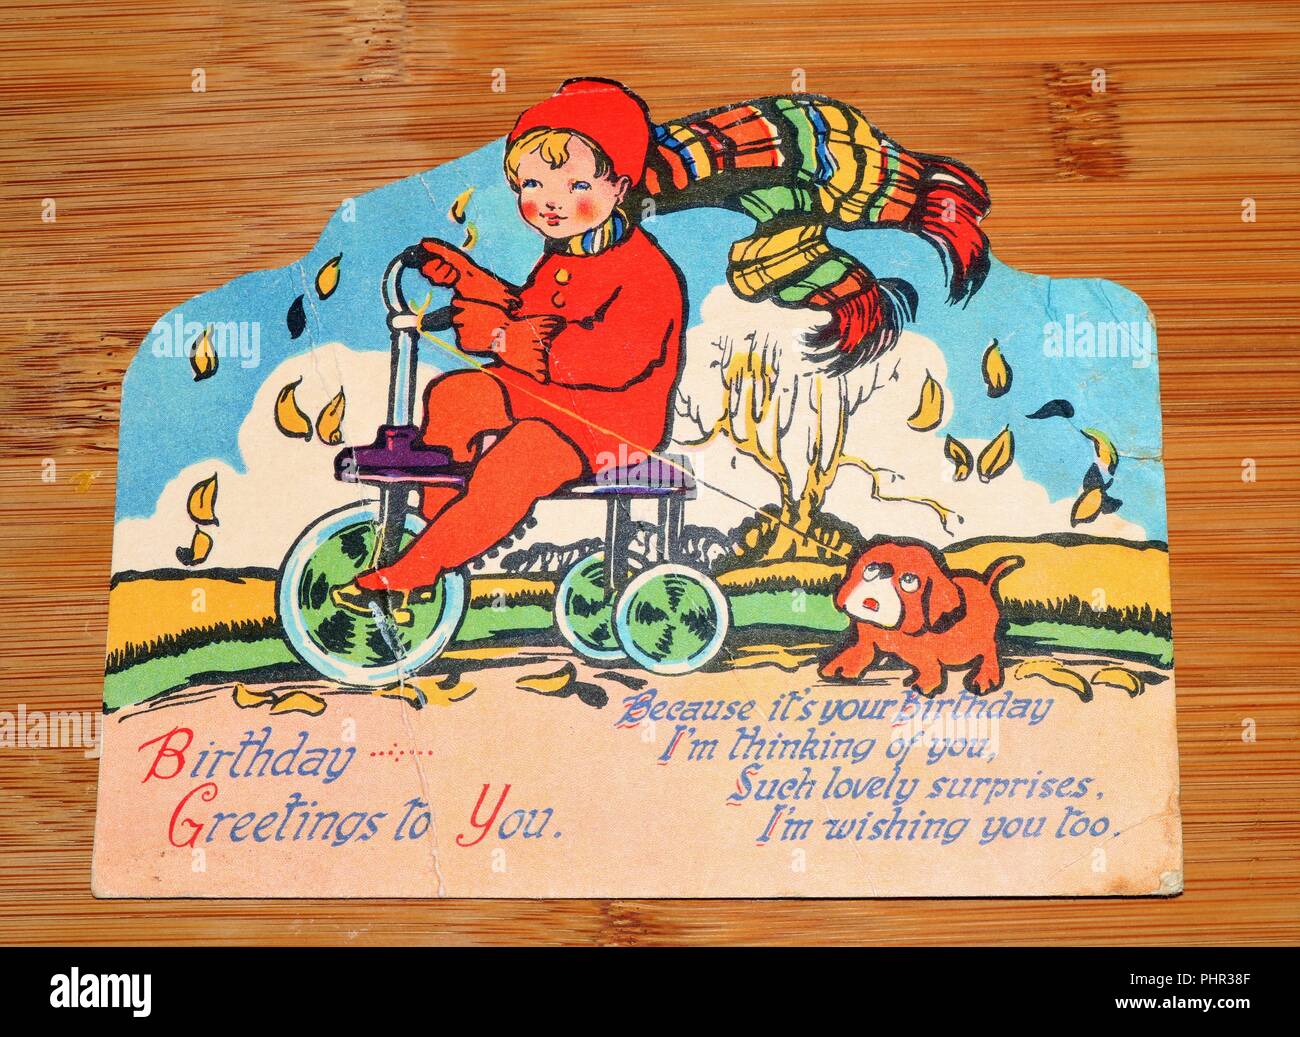 Vintage Greeting Card showing boy on bike - Social history Stock Photo